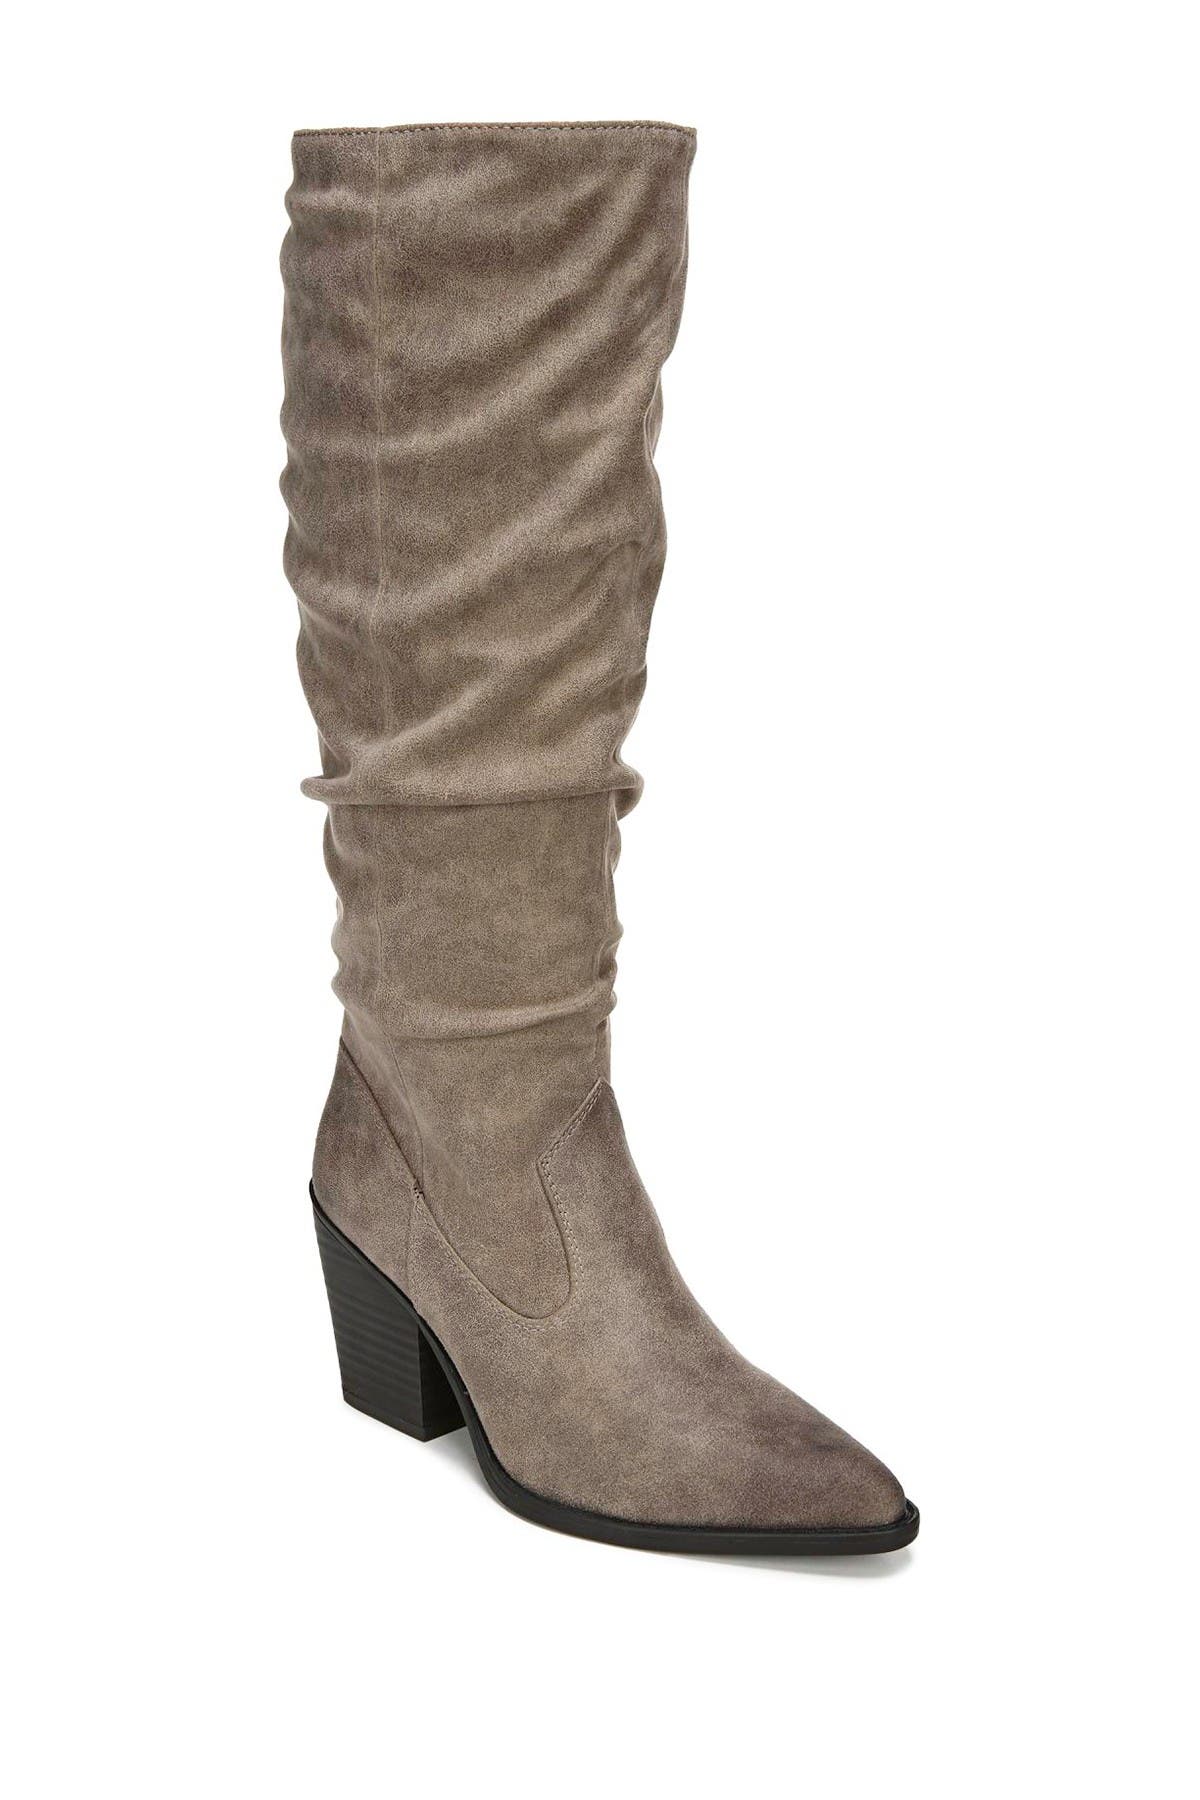 naturalizer wide width boots